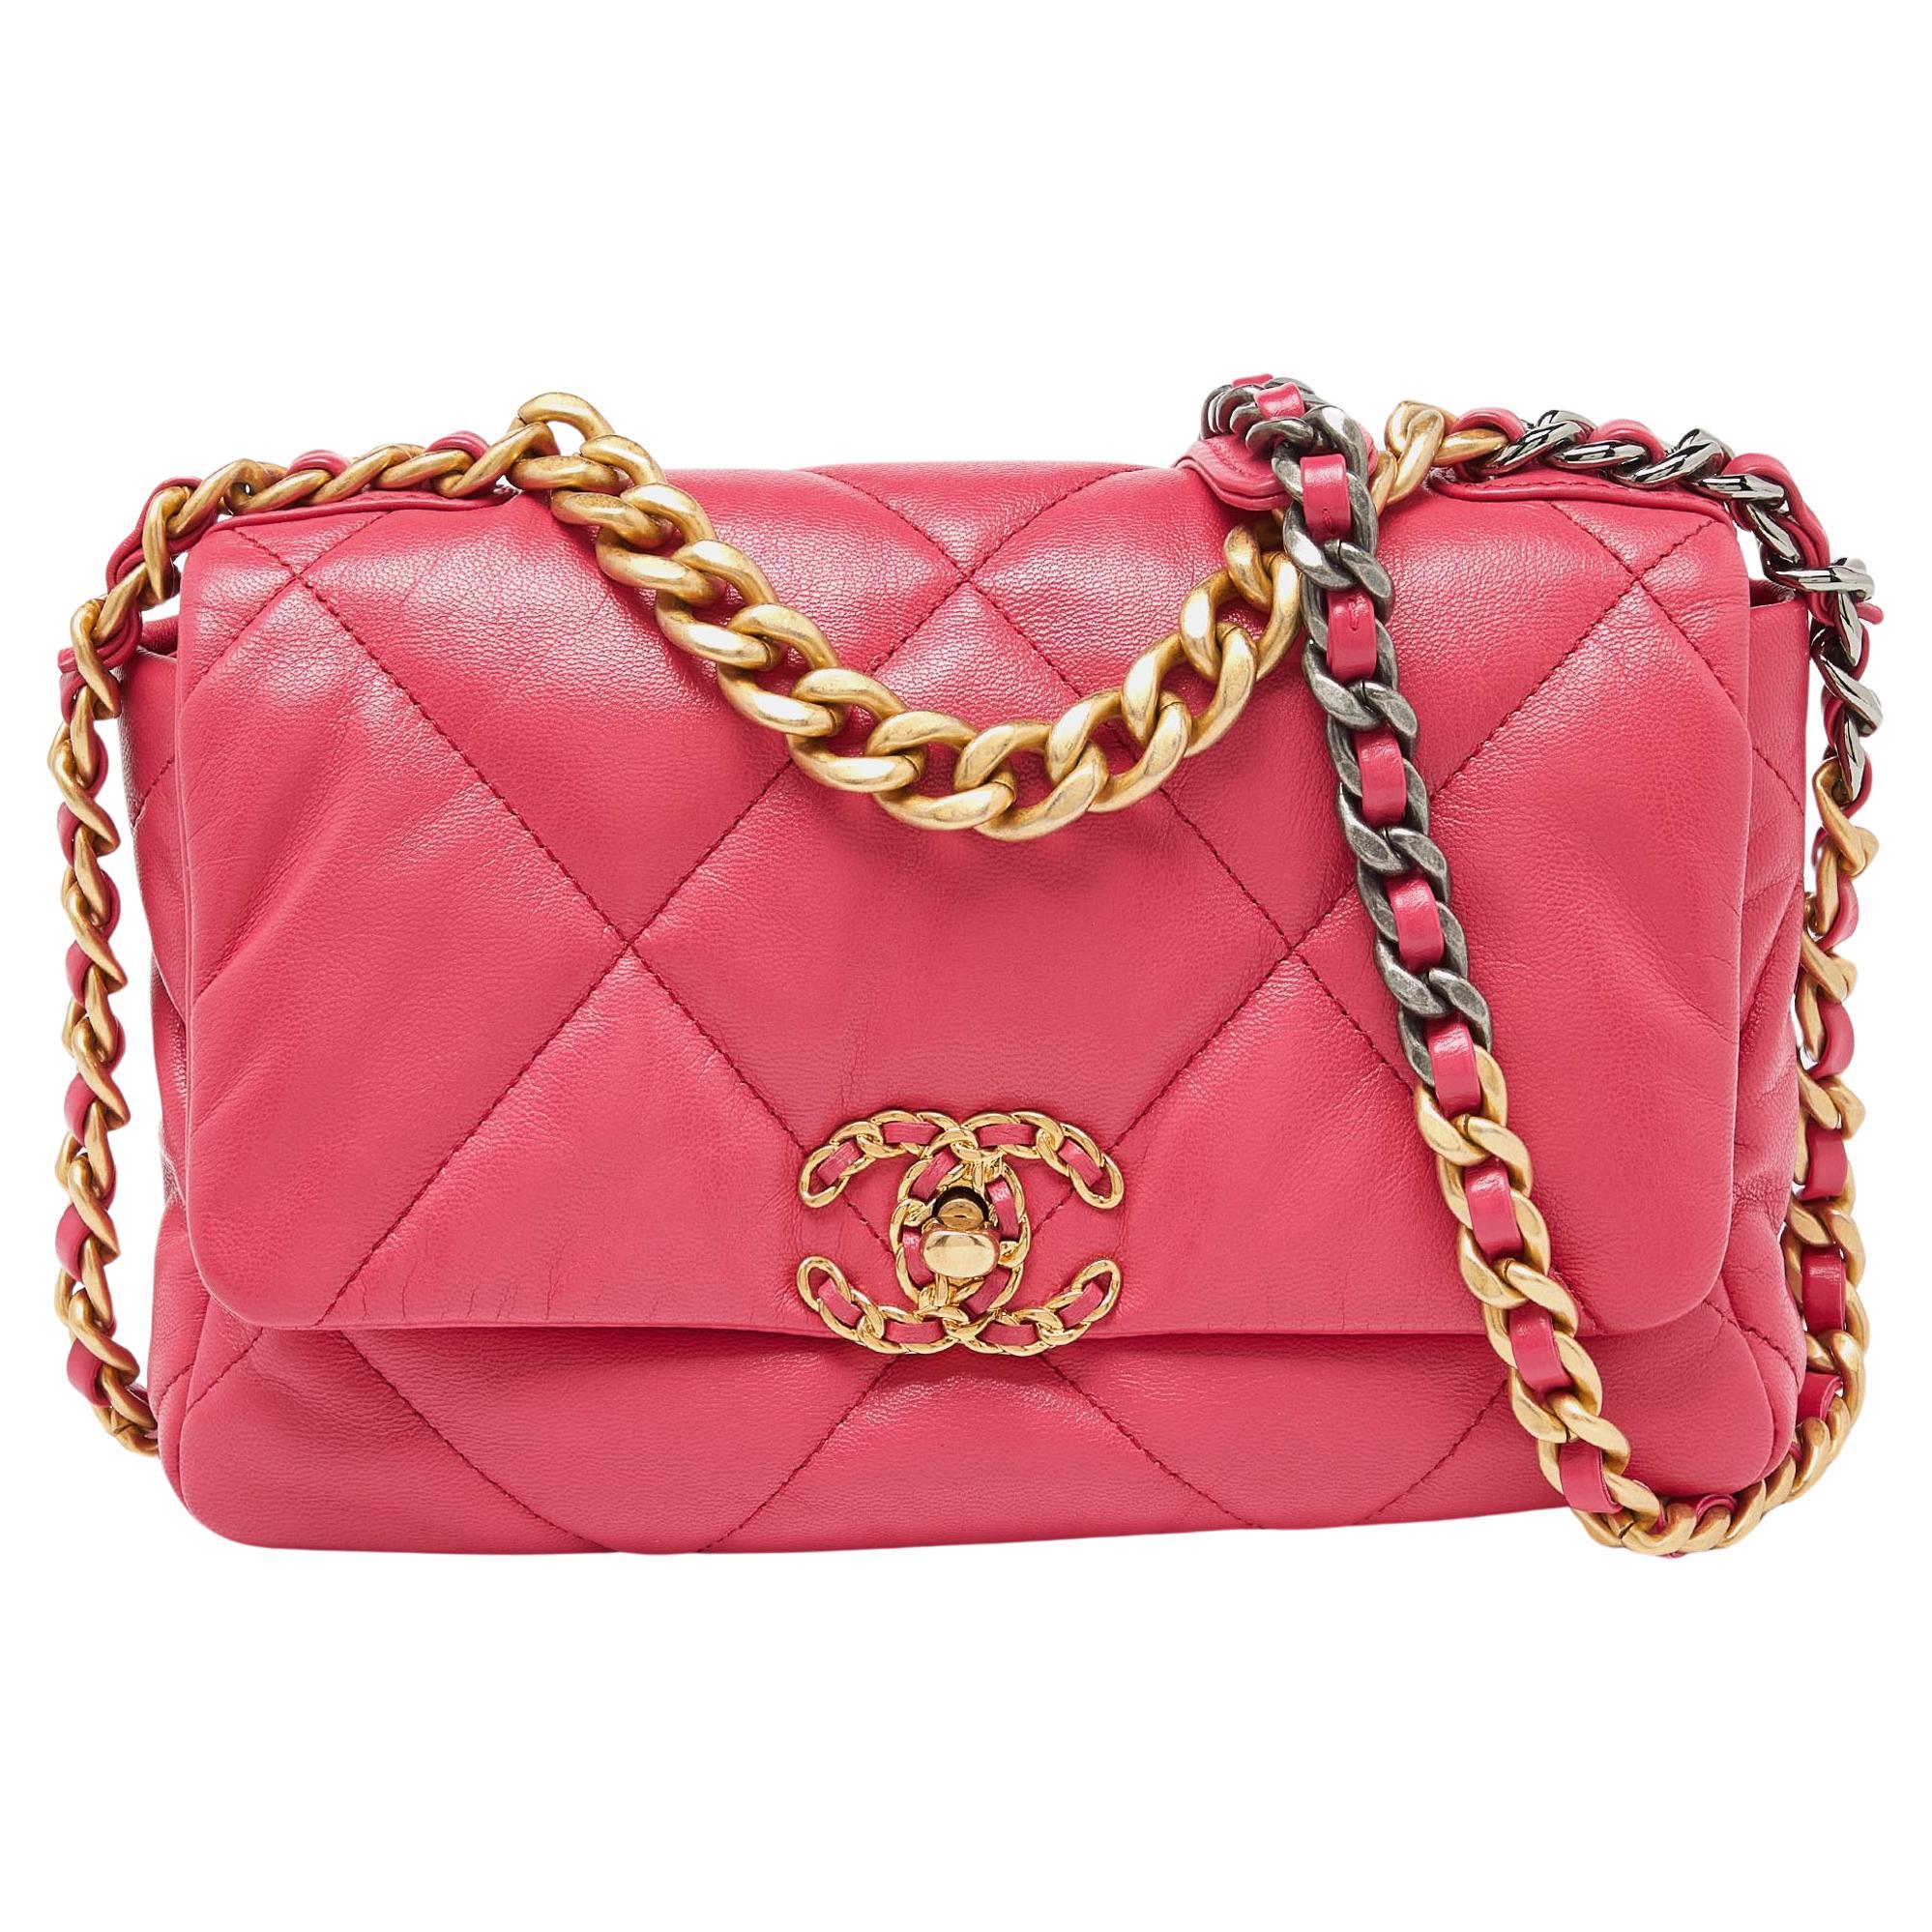 Chanel Pink Quilted Leather Medium 19 Flap Top Handle Bag For Sale